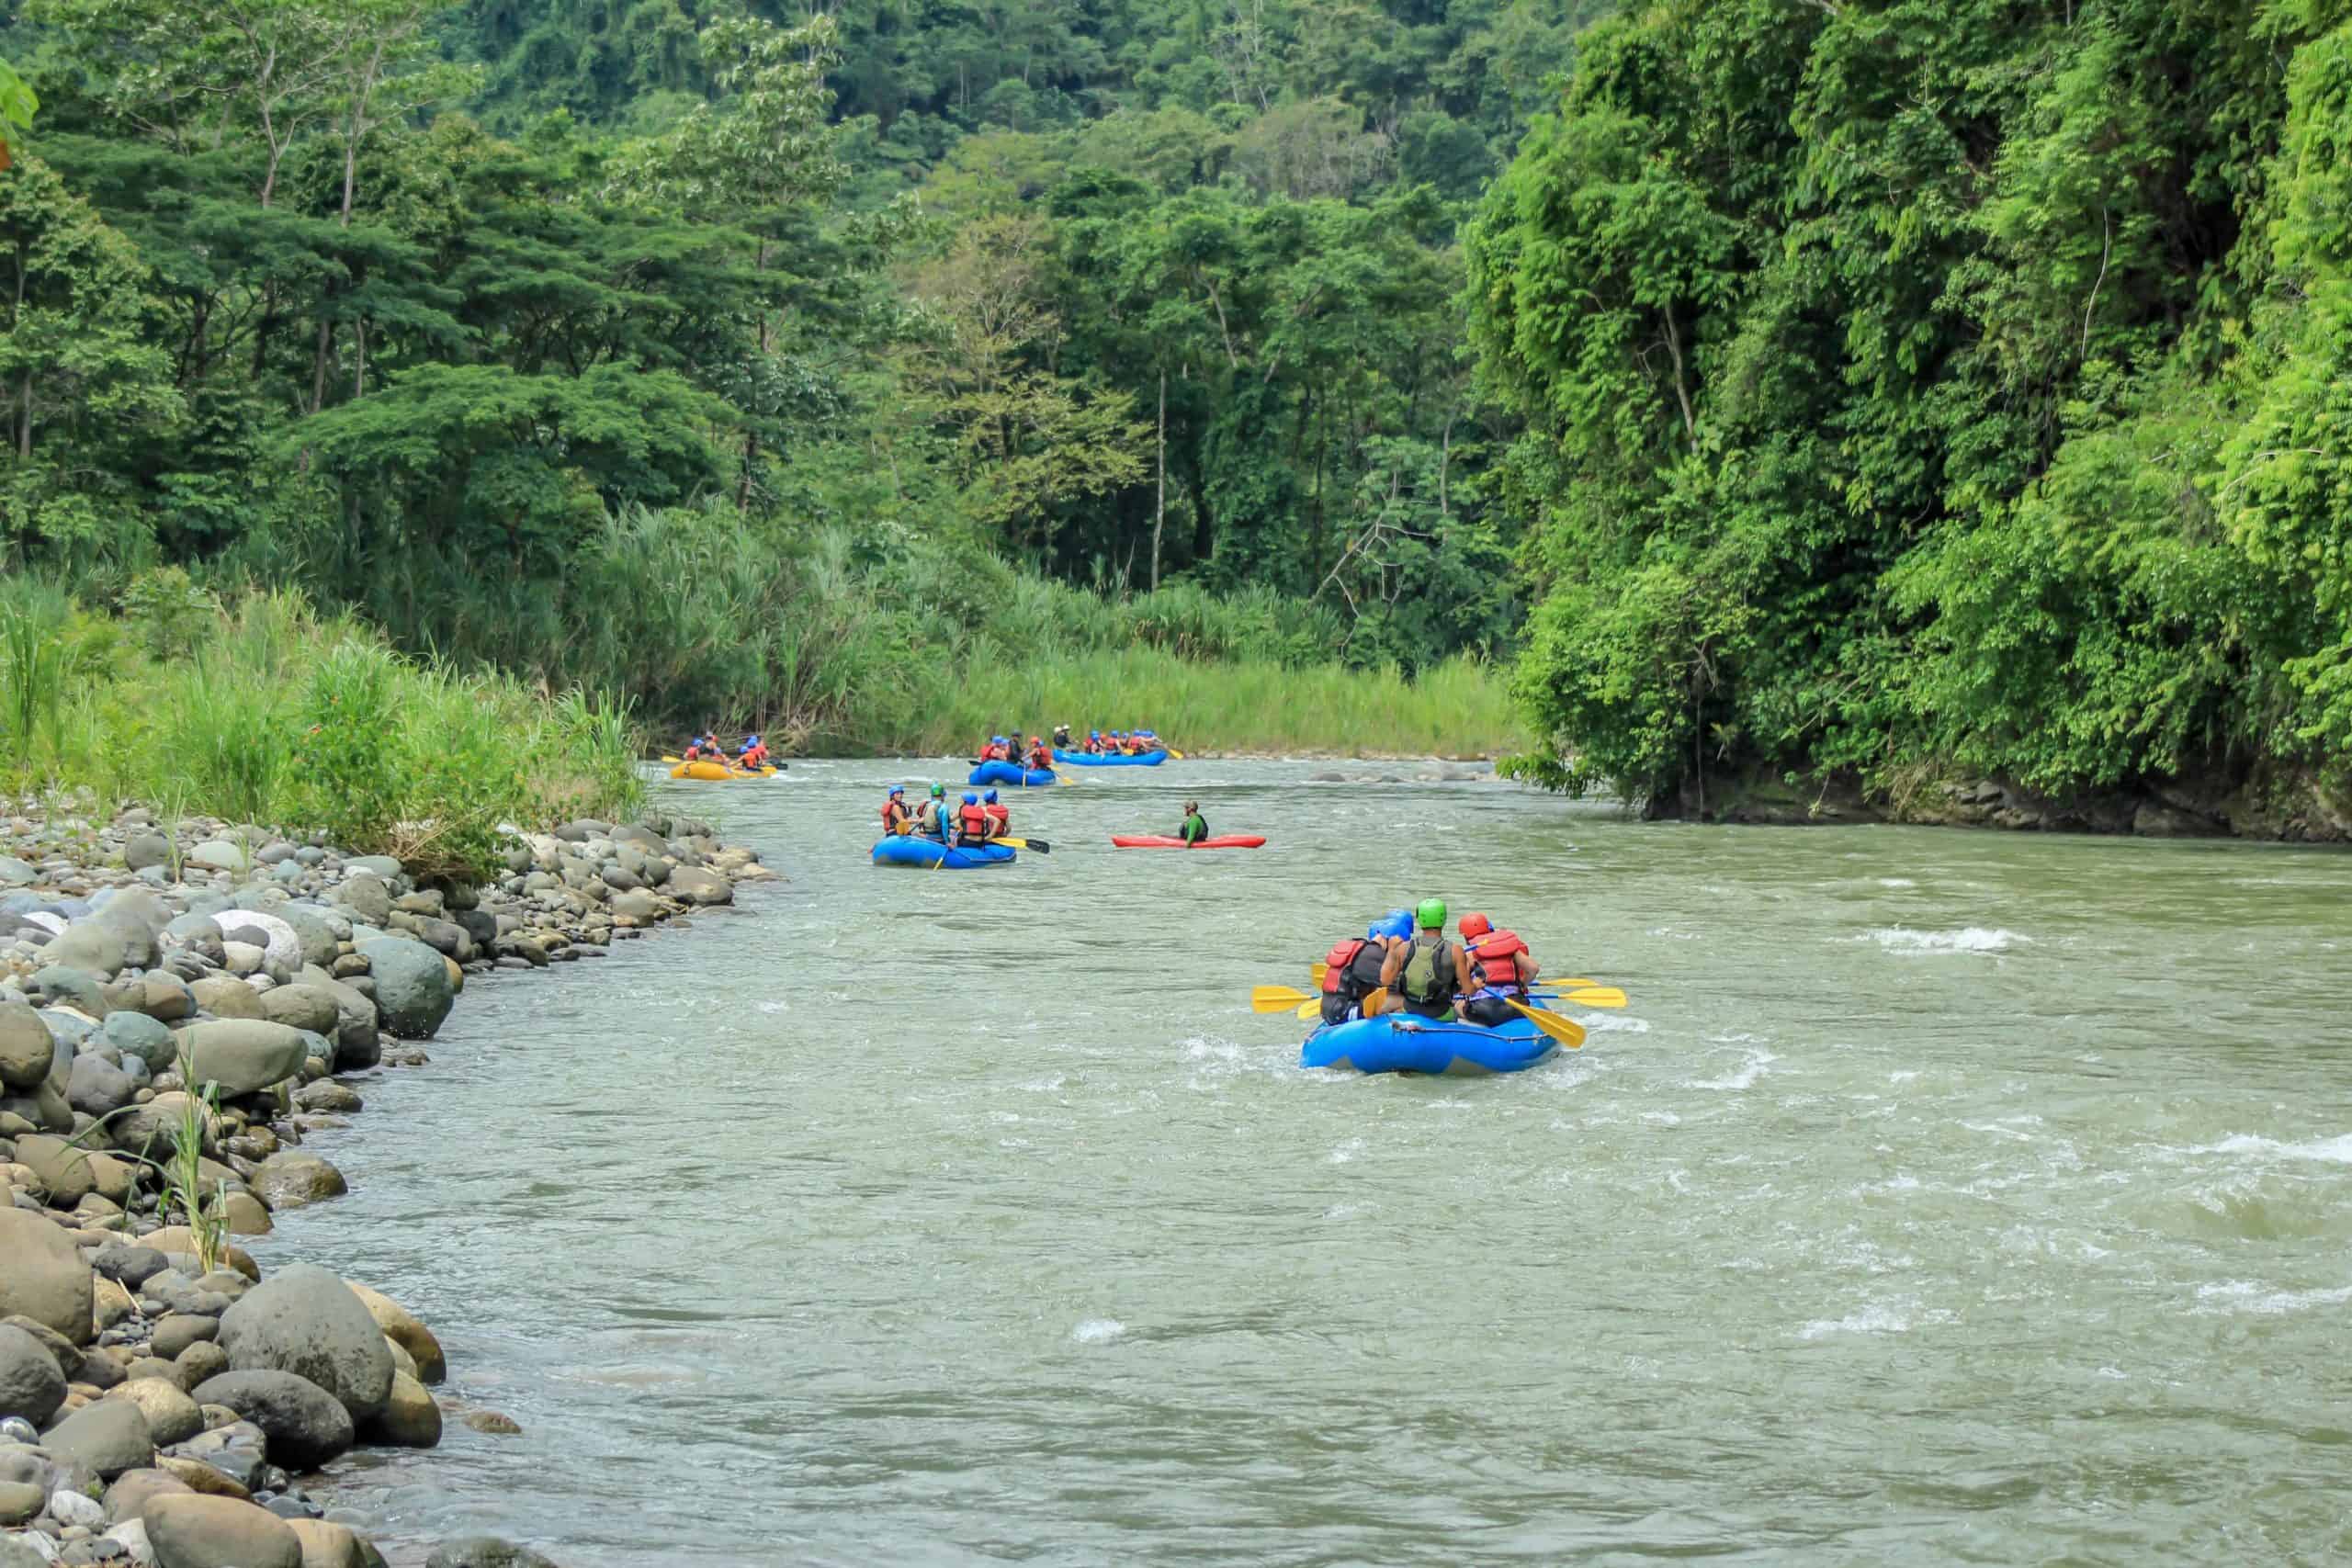 Adventurers in colorful rafts navigating a gently flowing river surrounded by lush greenery in a serene forest setting in Costa Rica.